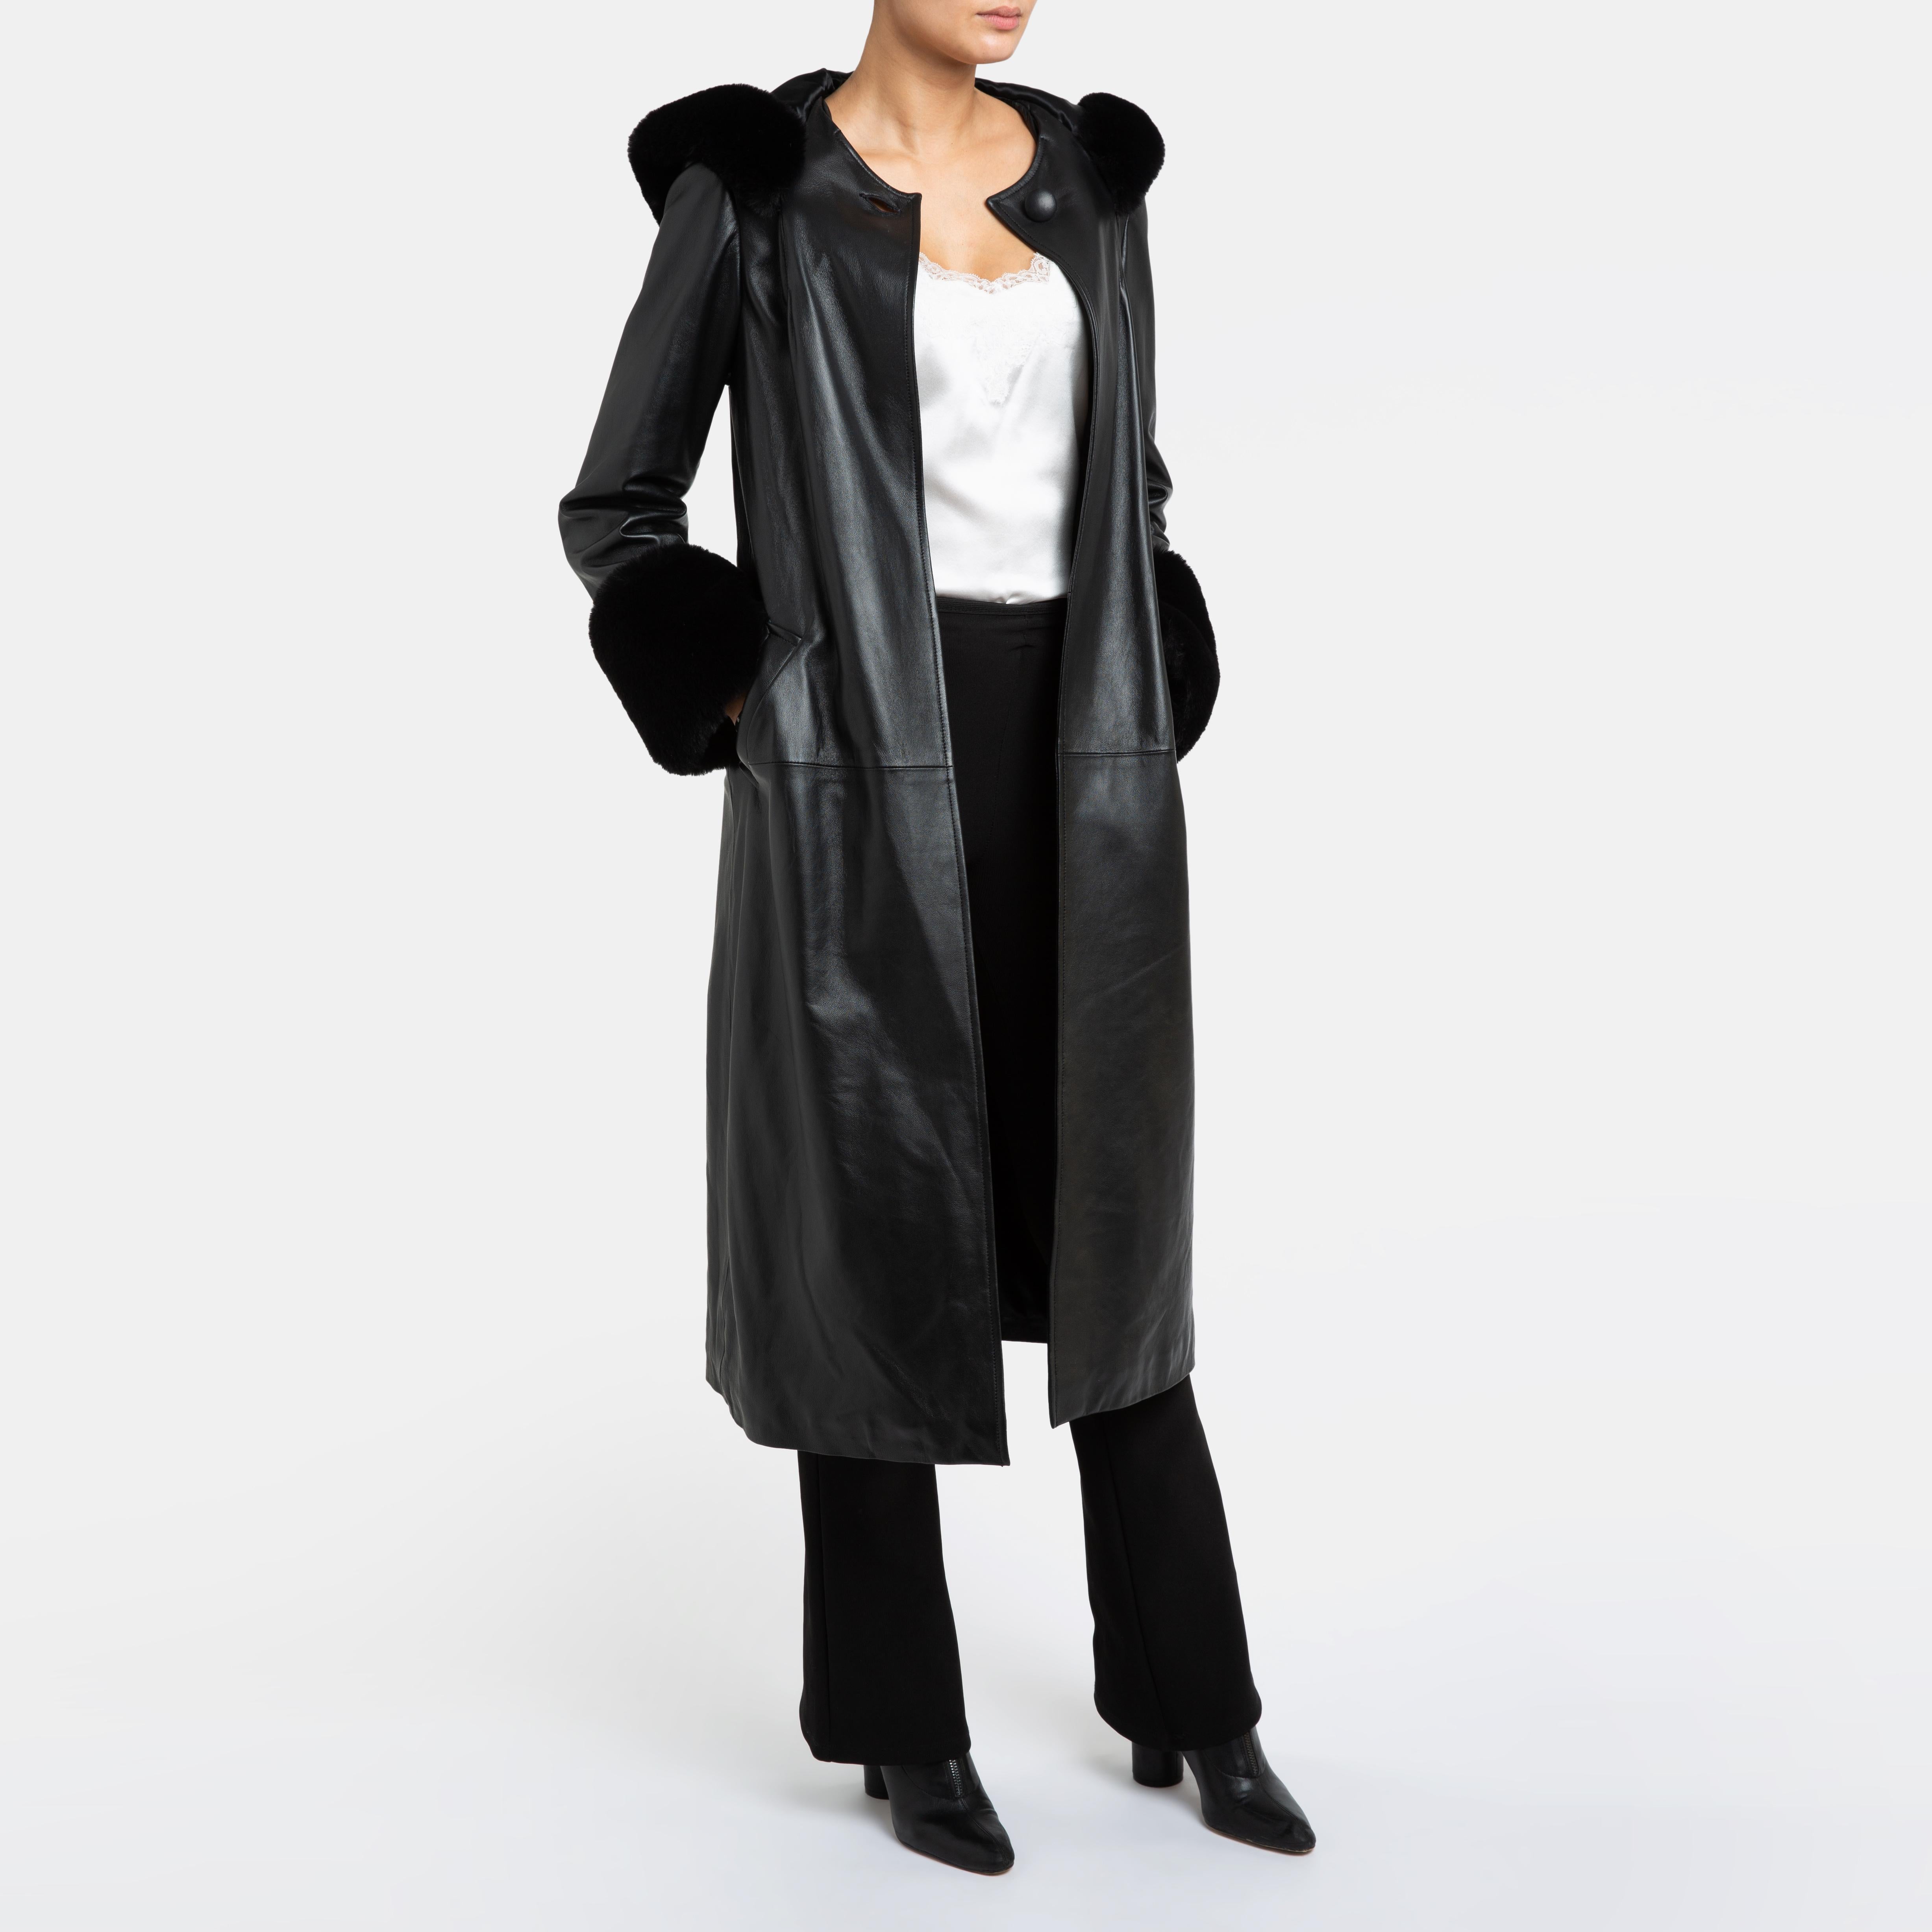 Verheyen London Hooded Leather Trench Coat in Black with Faux Fur - Size uk 10  For Sale 5